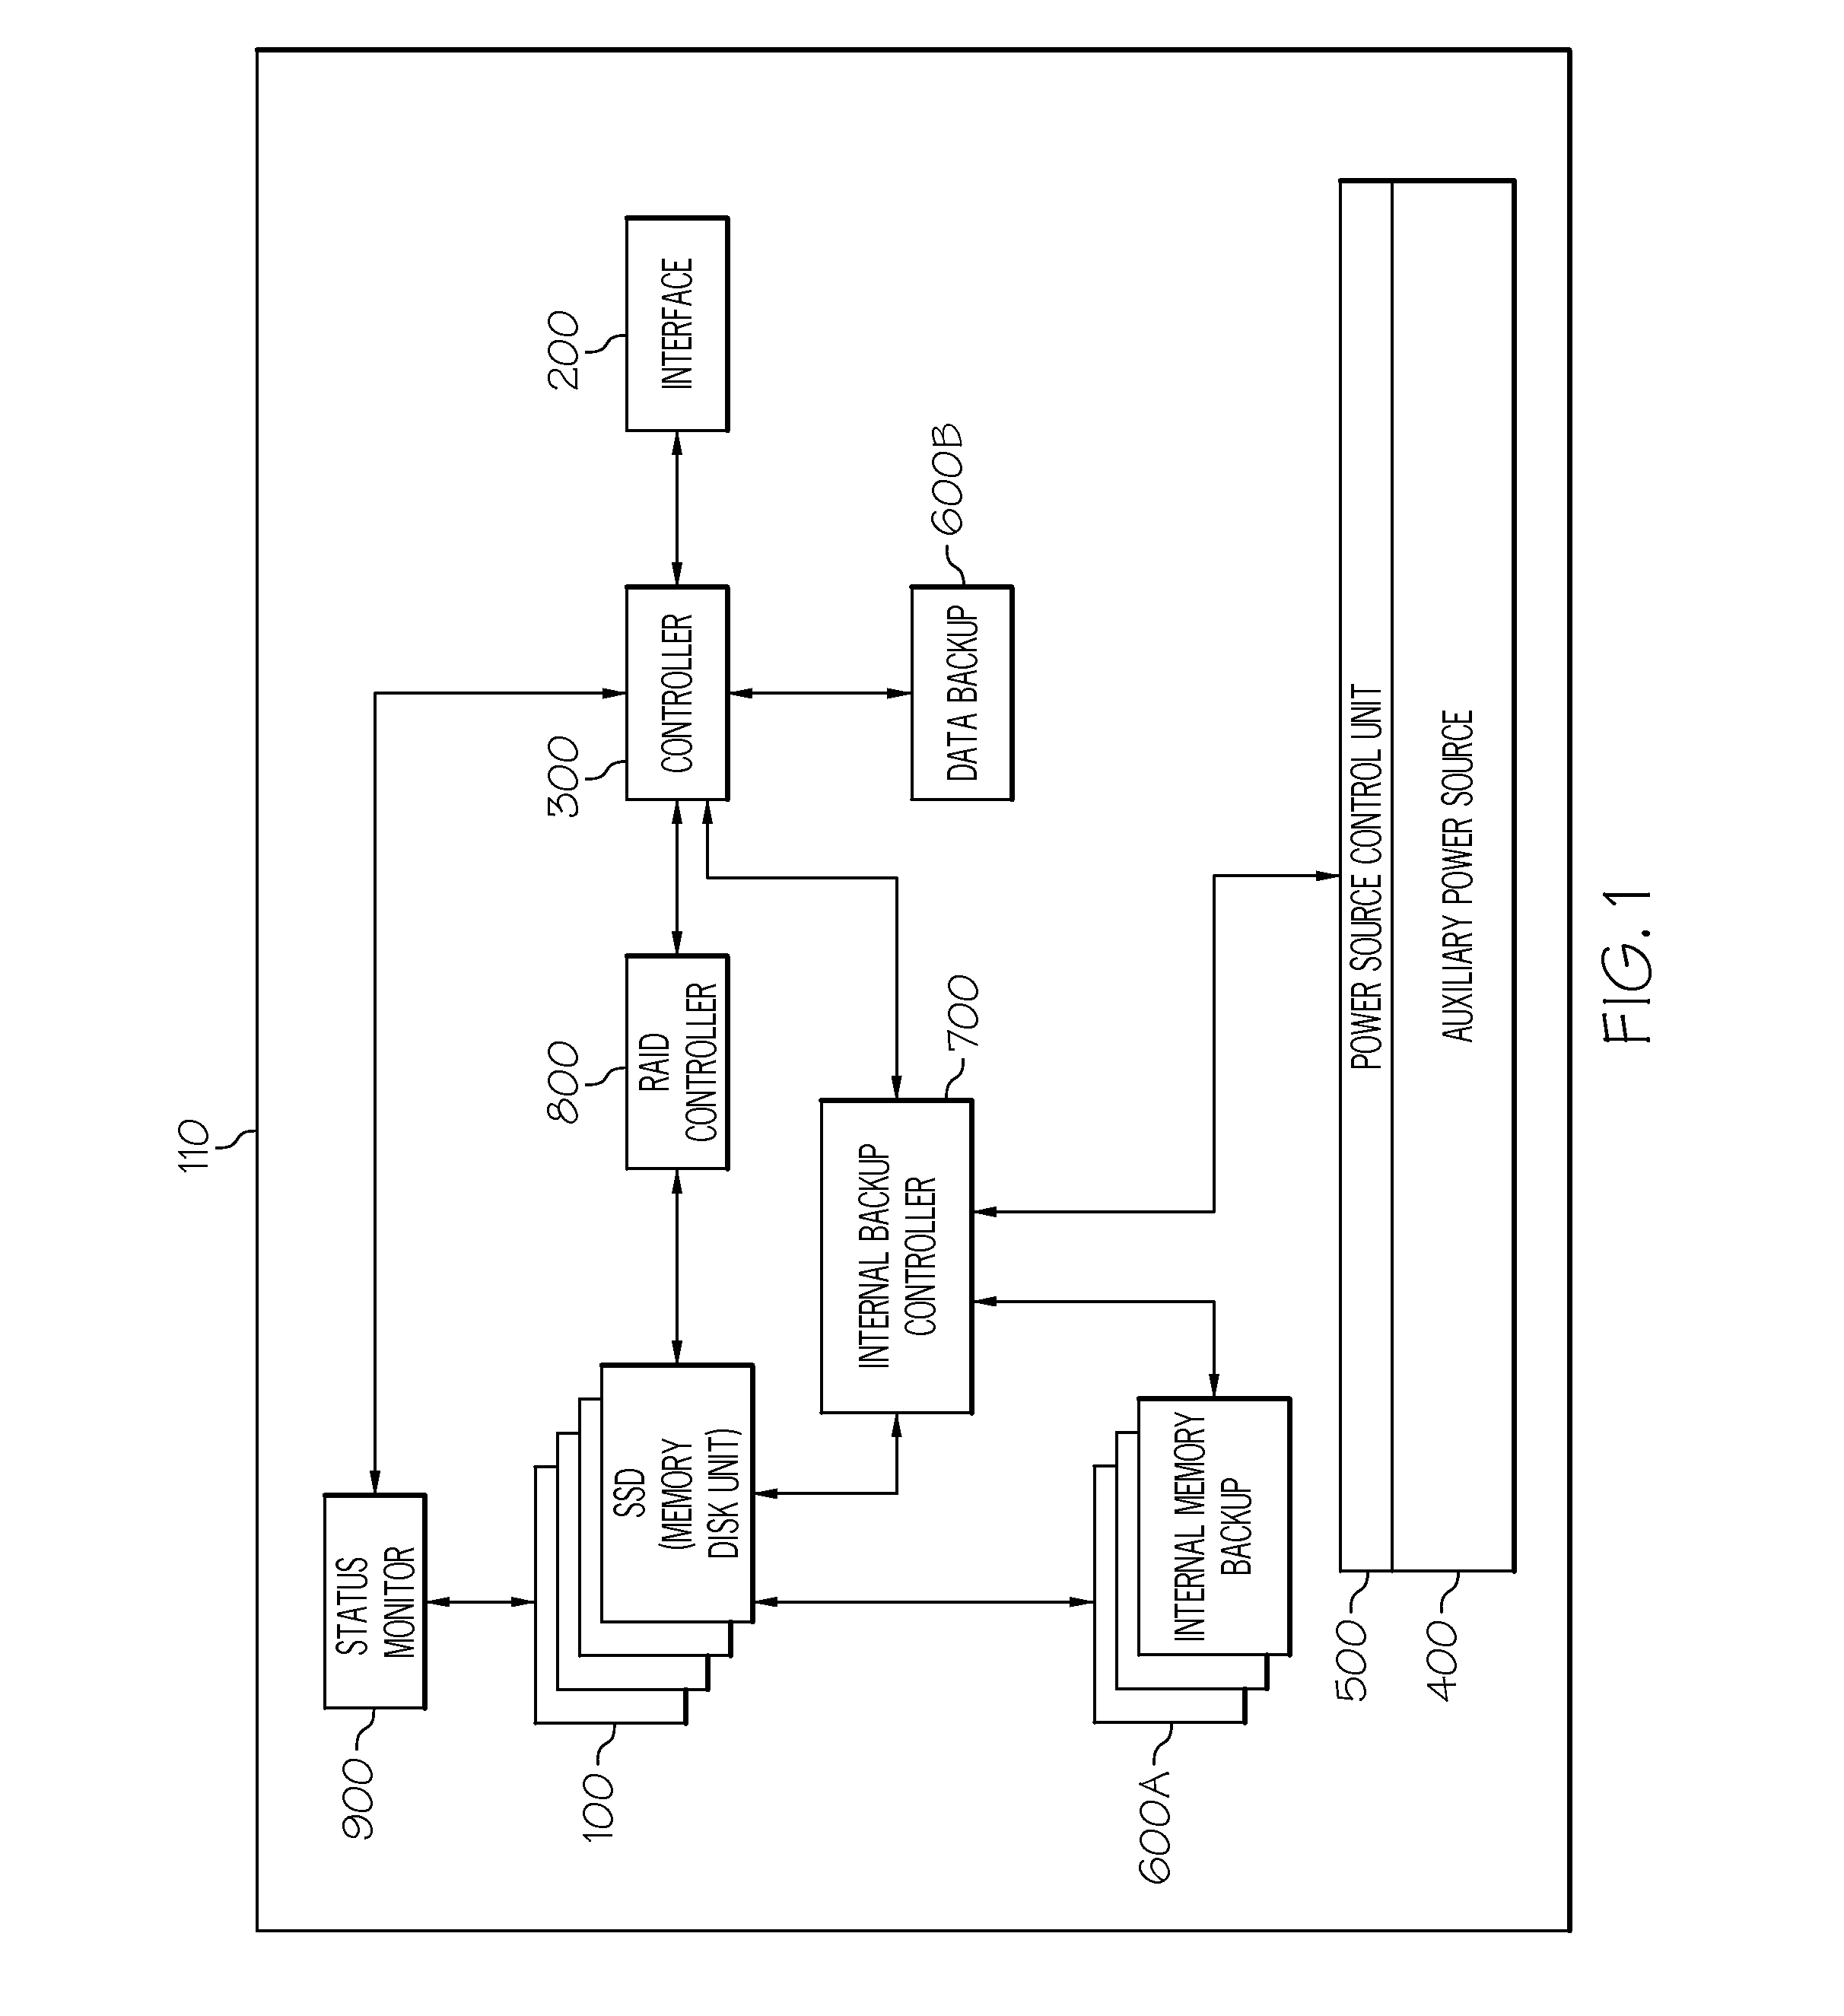 Alarm-based backup and restoration for a semiconductor storage device